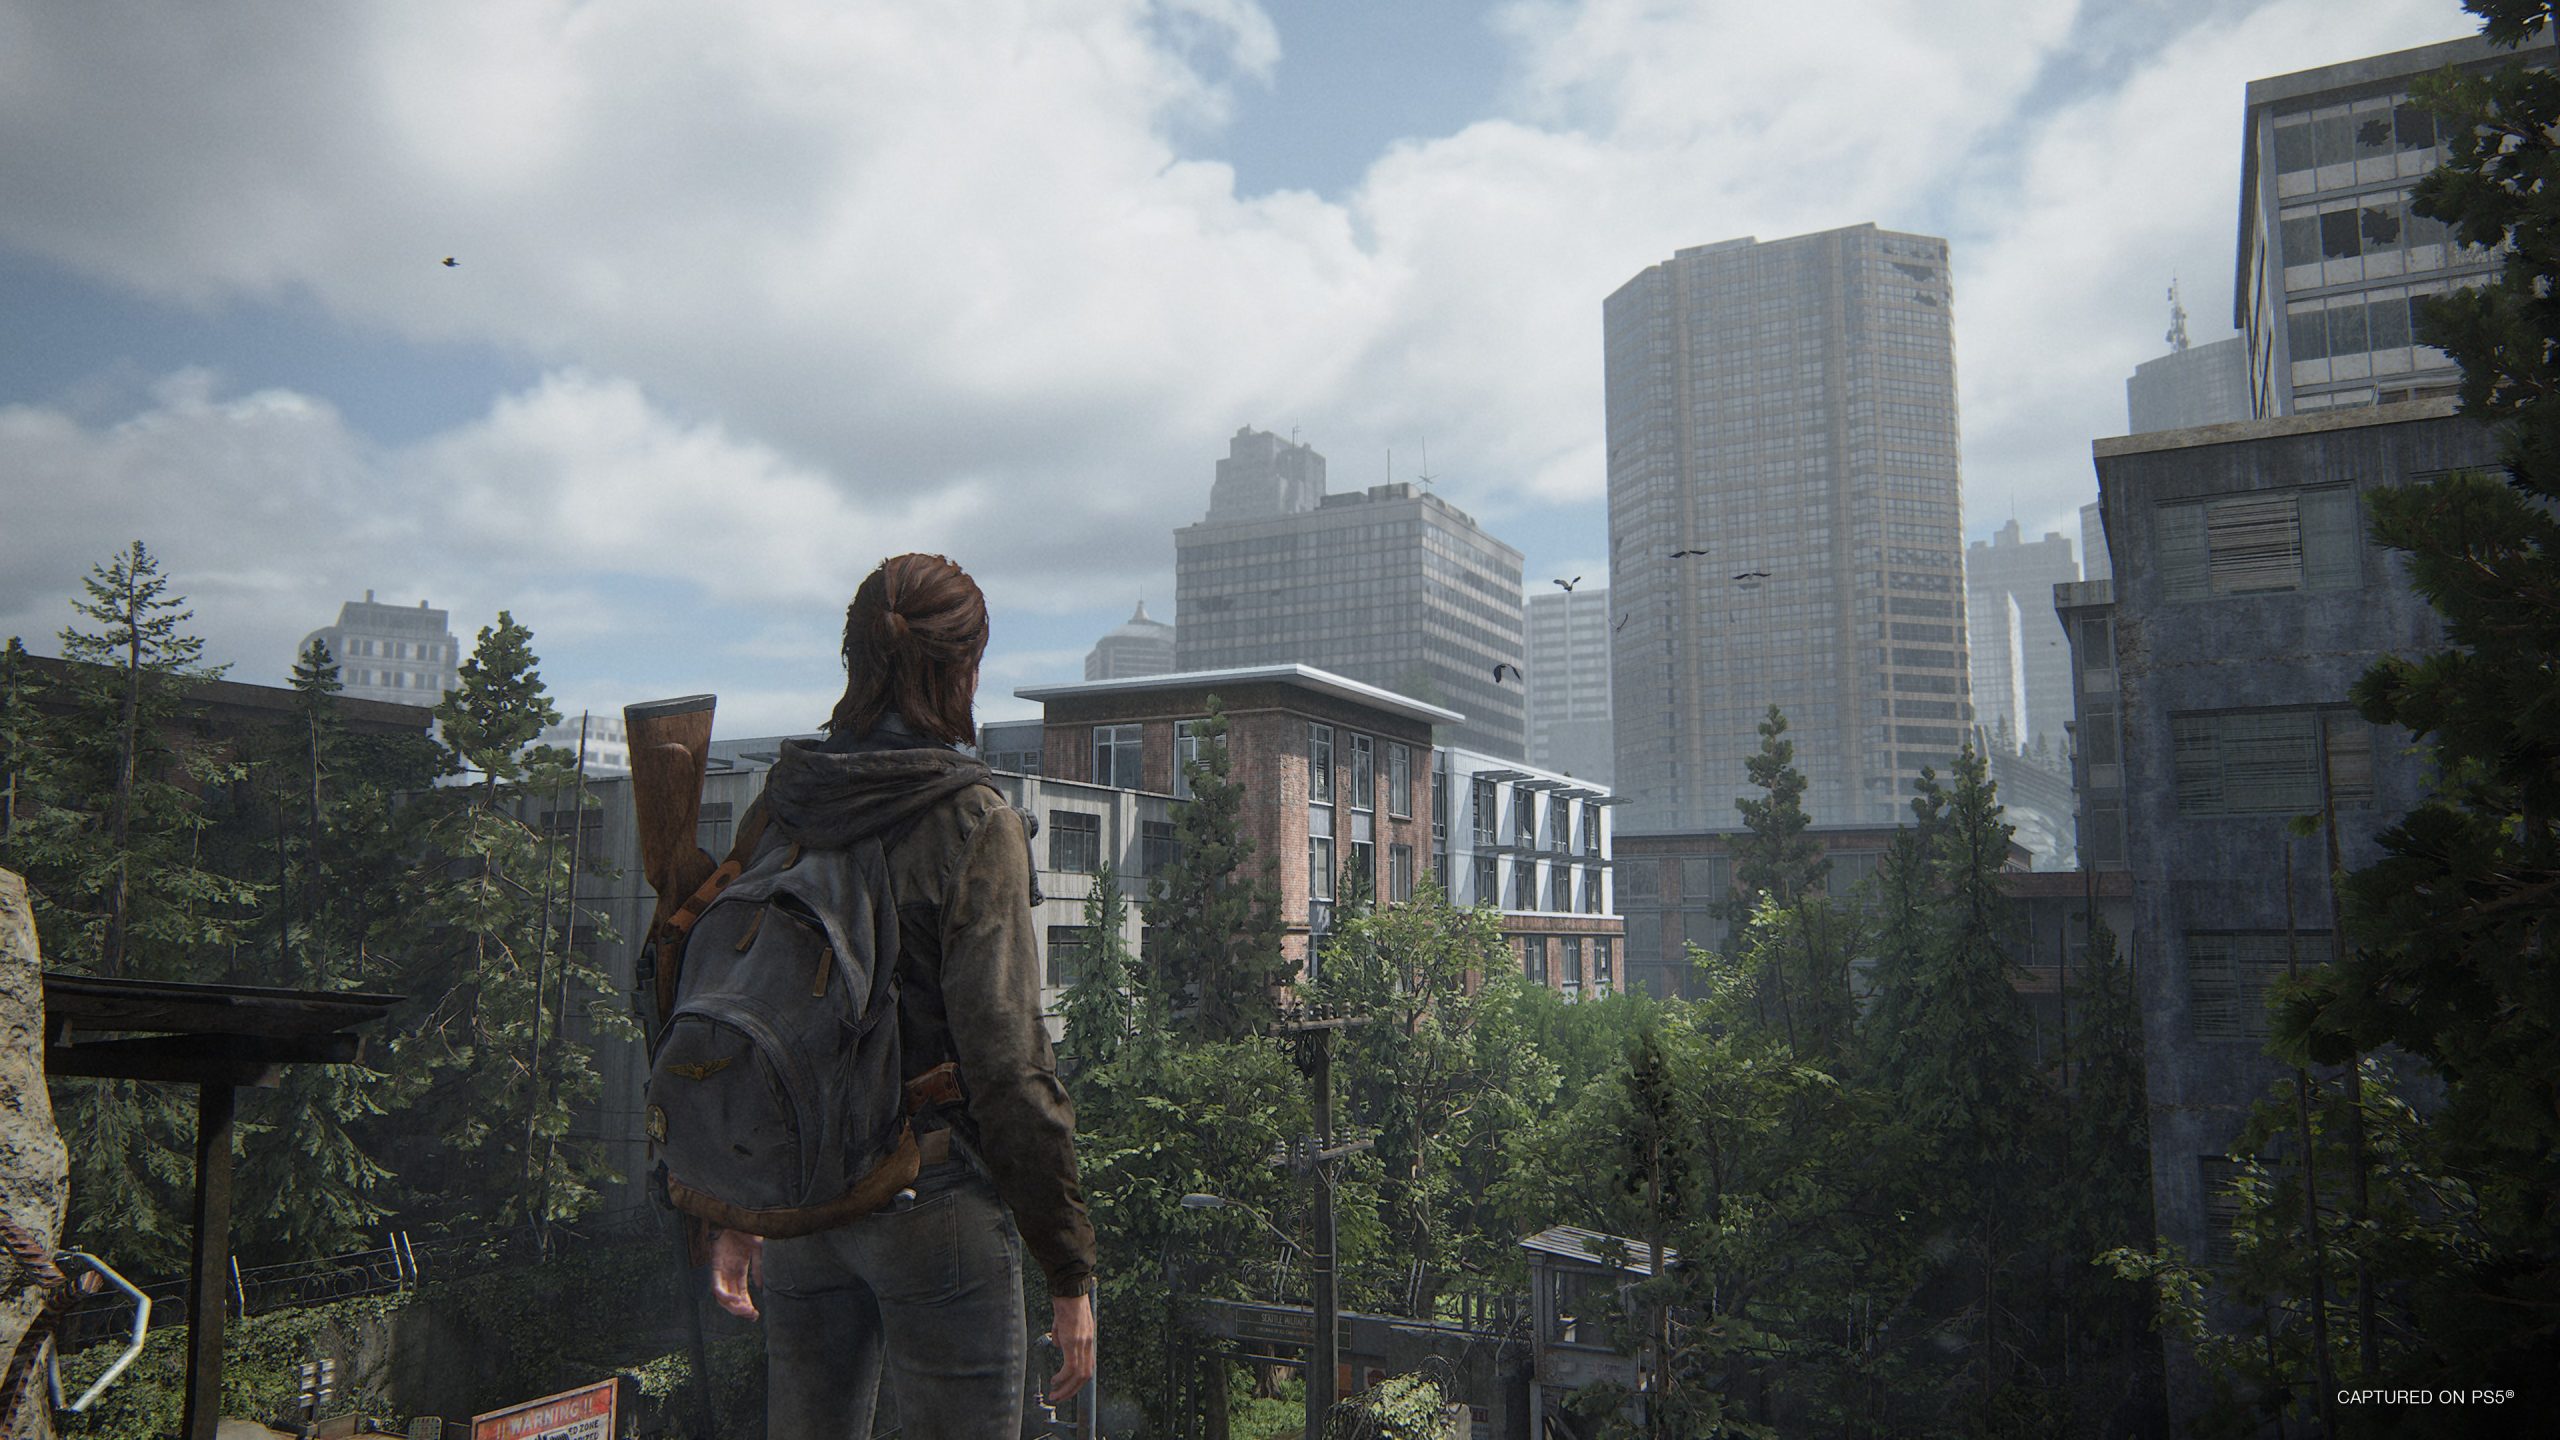 The Last of Us Part II players on PS4 - Naughty Dog, LLC